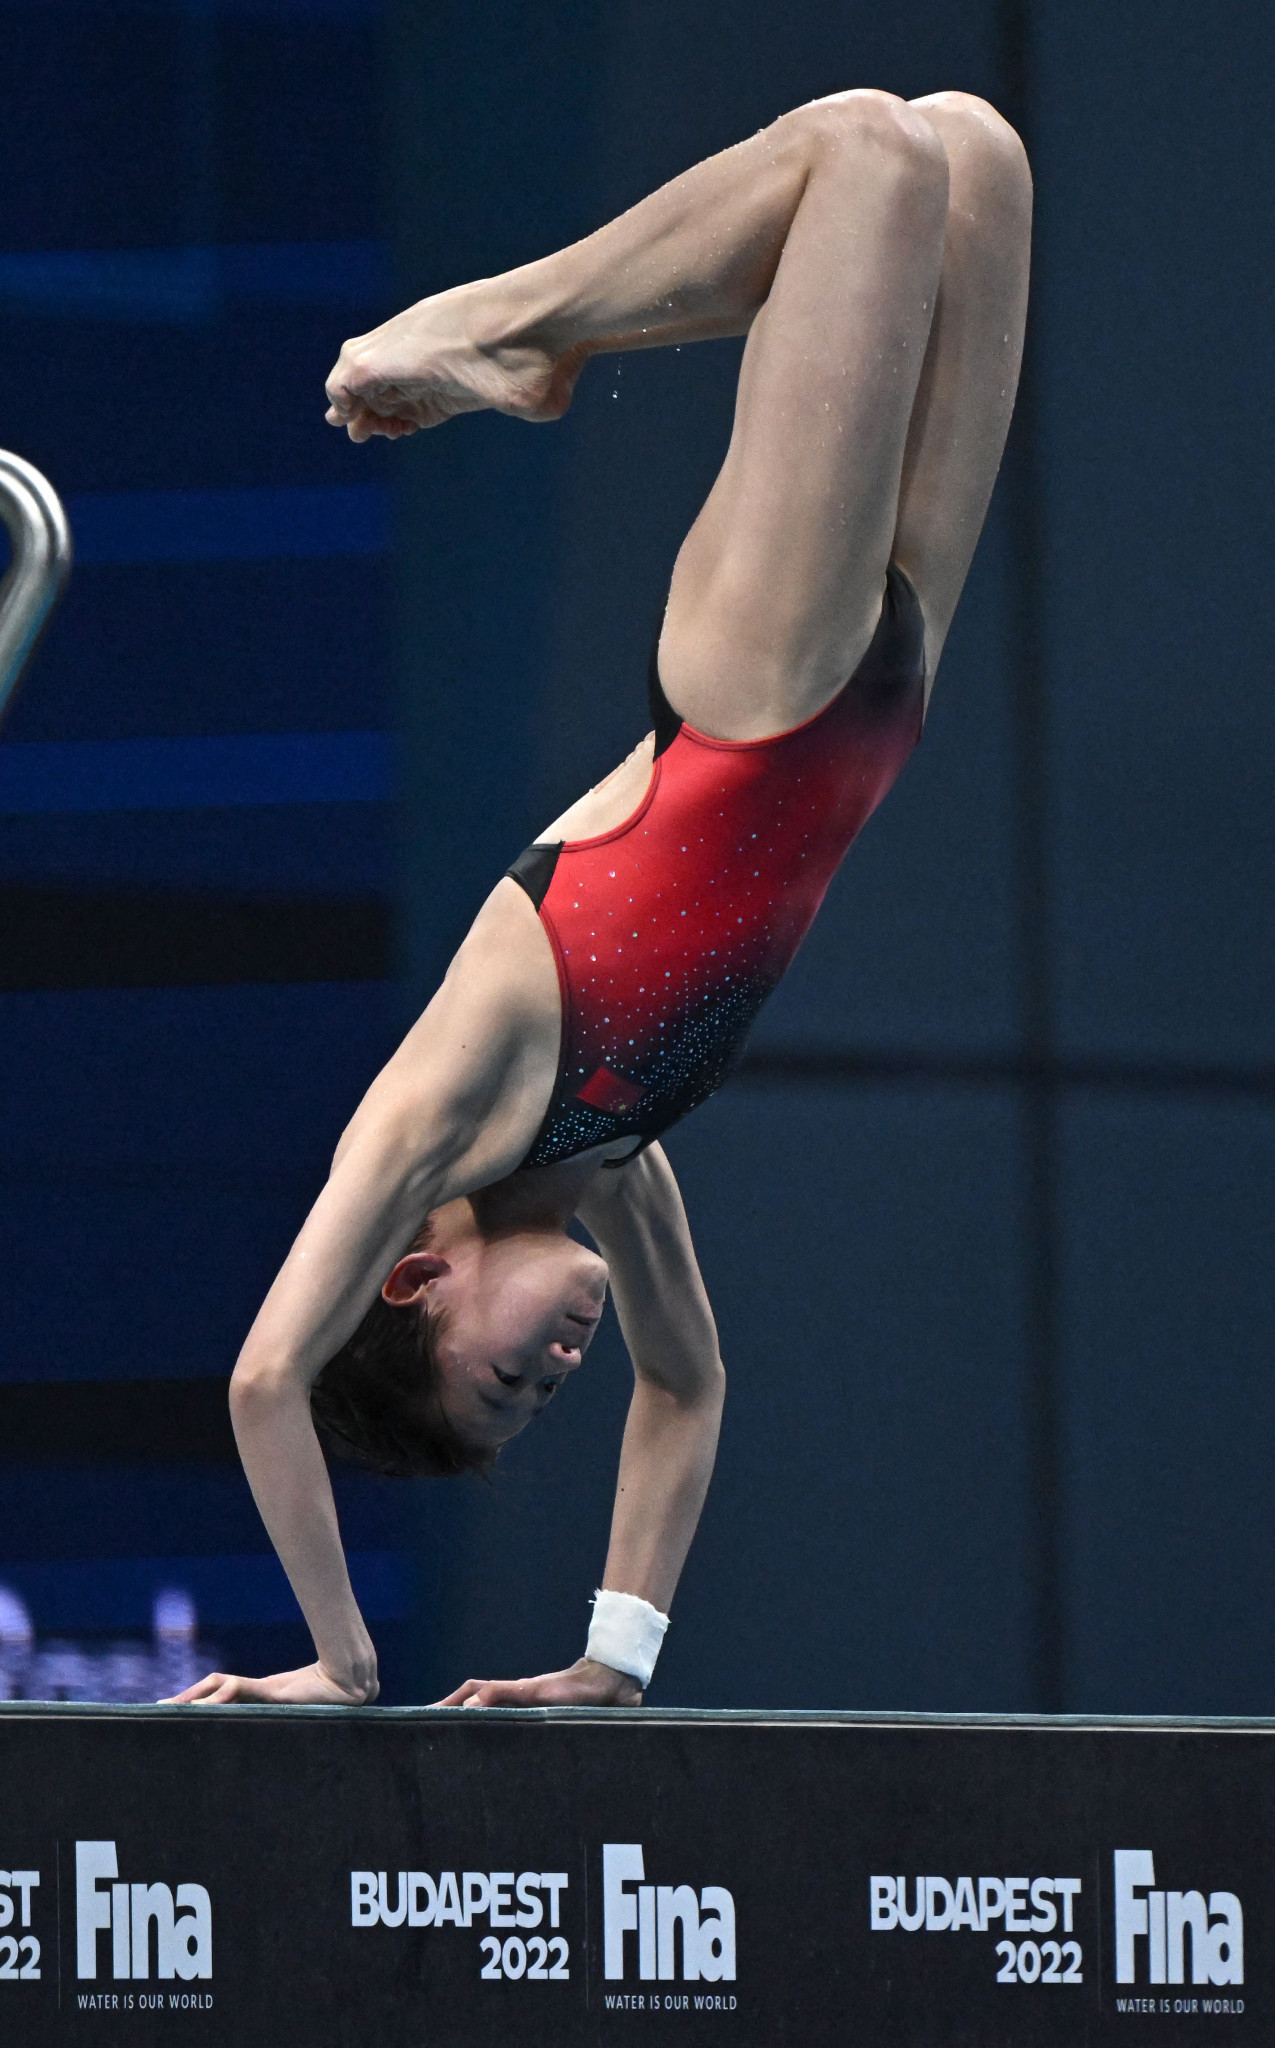 Olympic champion Quan Hongchan of China was her compatriot Chen Yuxi's closest challenger in the women's 10m platform preliminary round and semi-final ©Getty Images